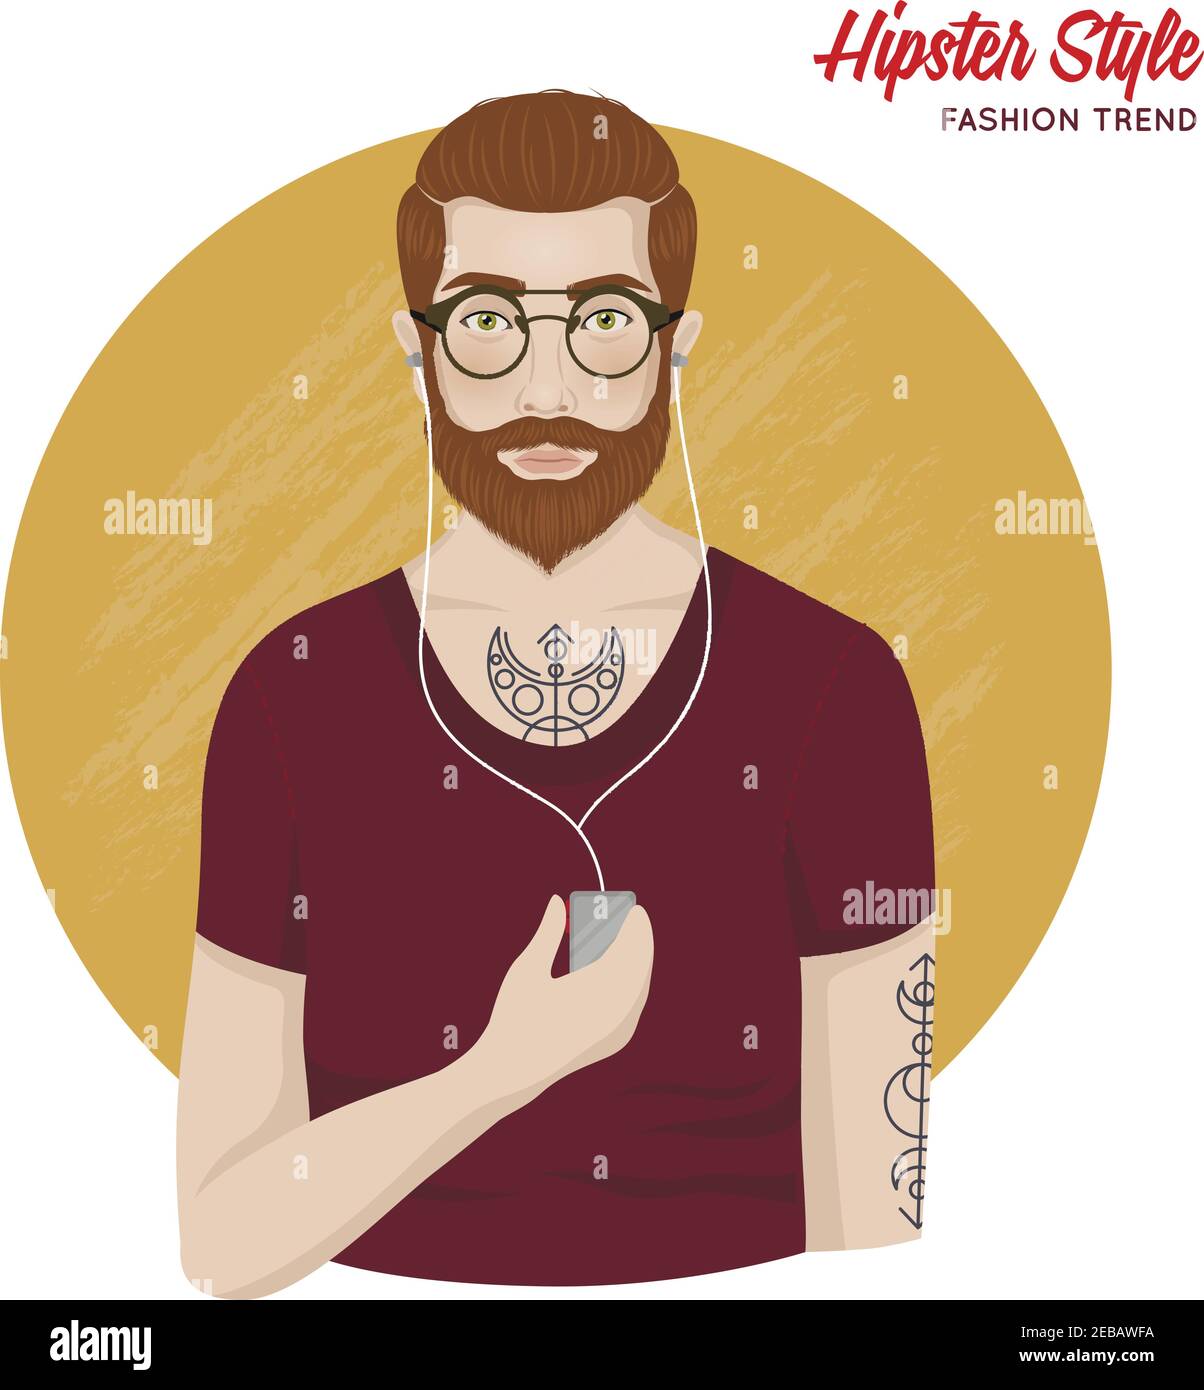 Hipster style template with man shirt beard mustache tatoos glasses headphones isolated vector illustration Stock Vector